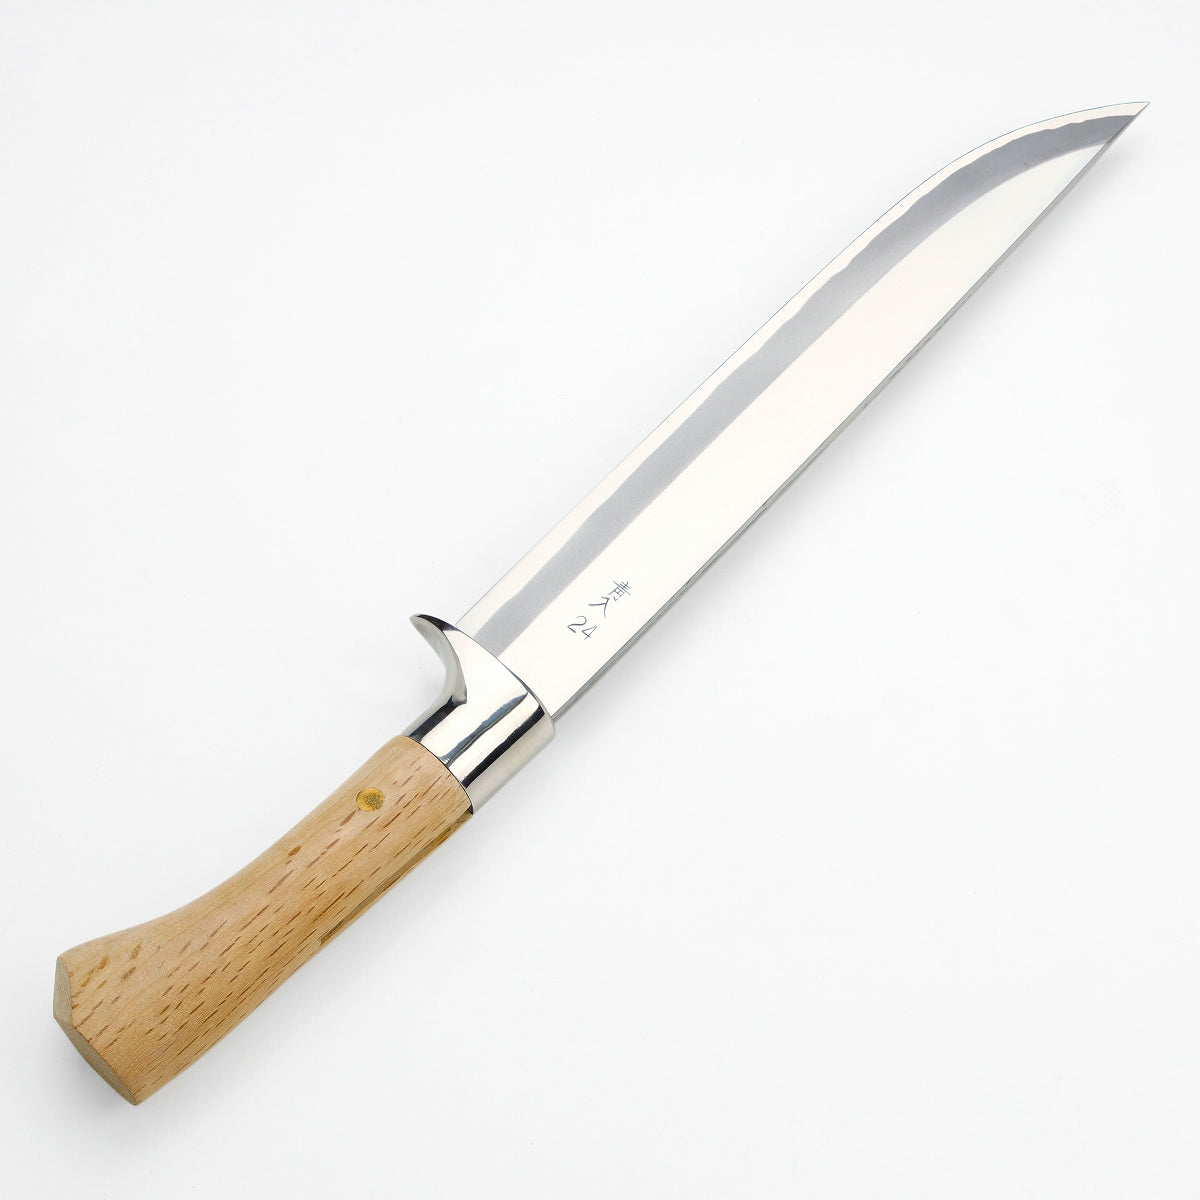 HONMAMON "AZUMASYUSAKU" Hunting Knife with Carving of a Boar 240mm Japanese Outdoor Knife